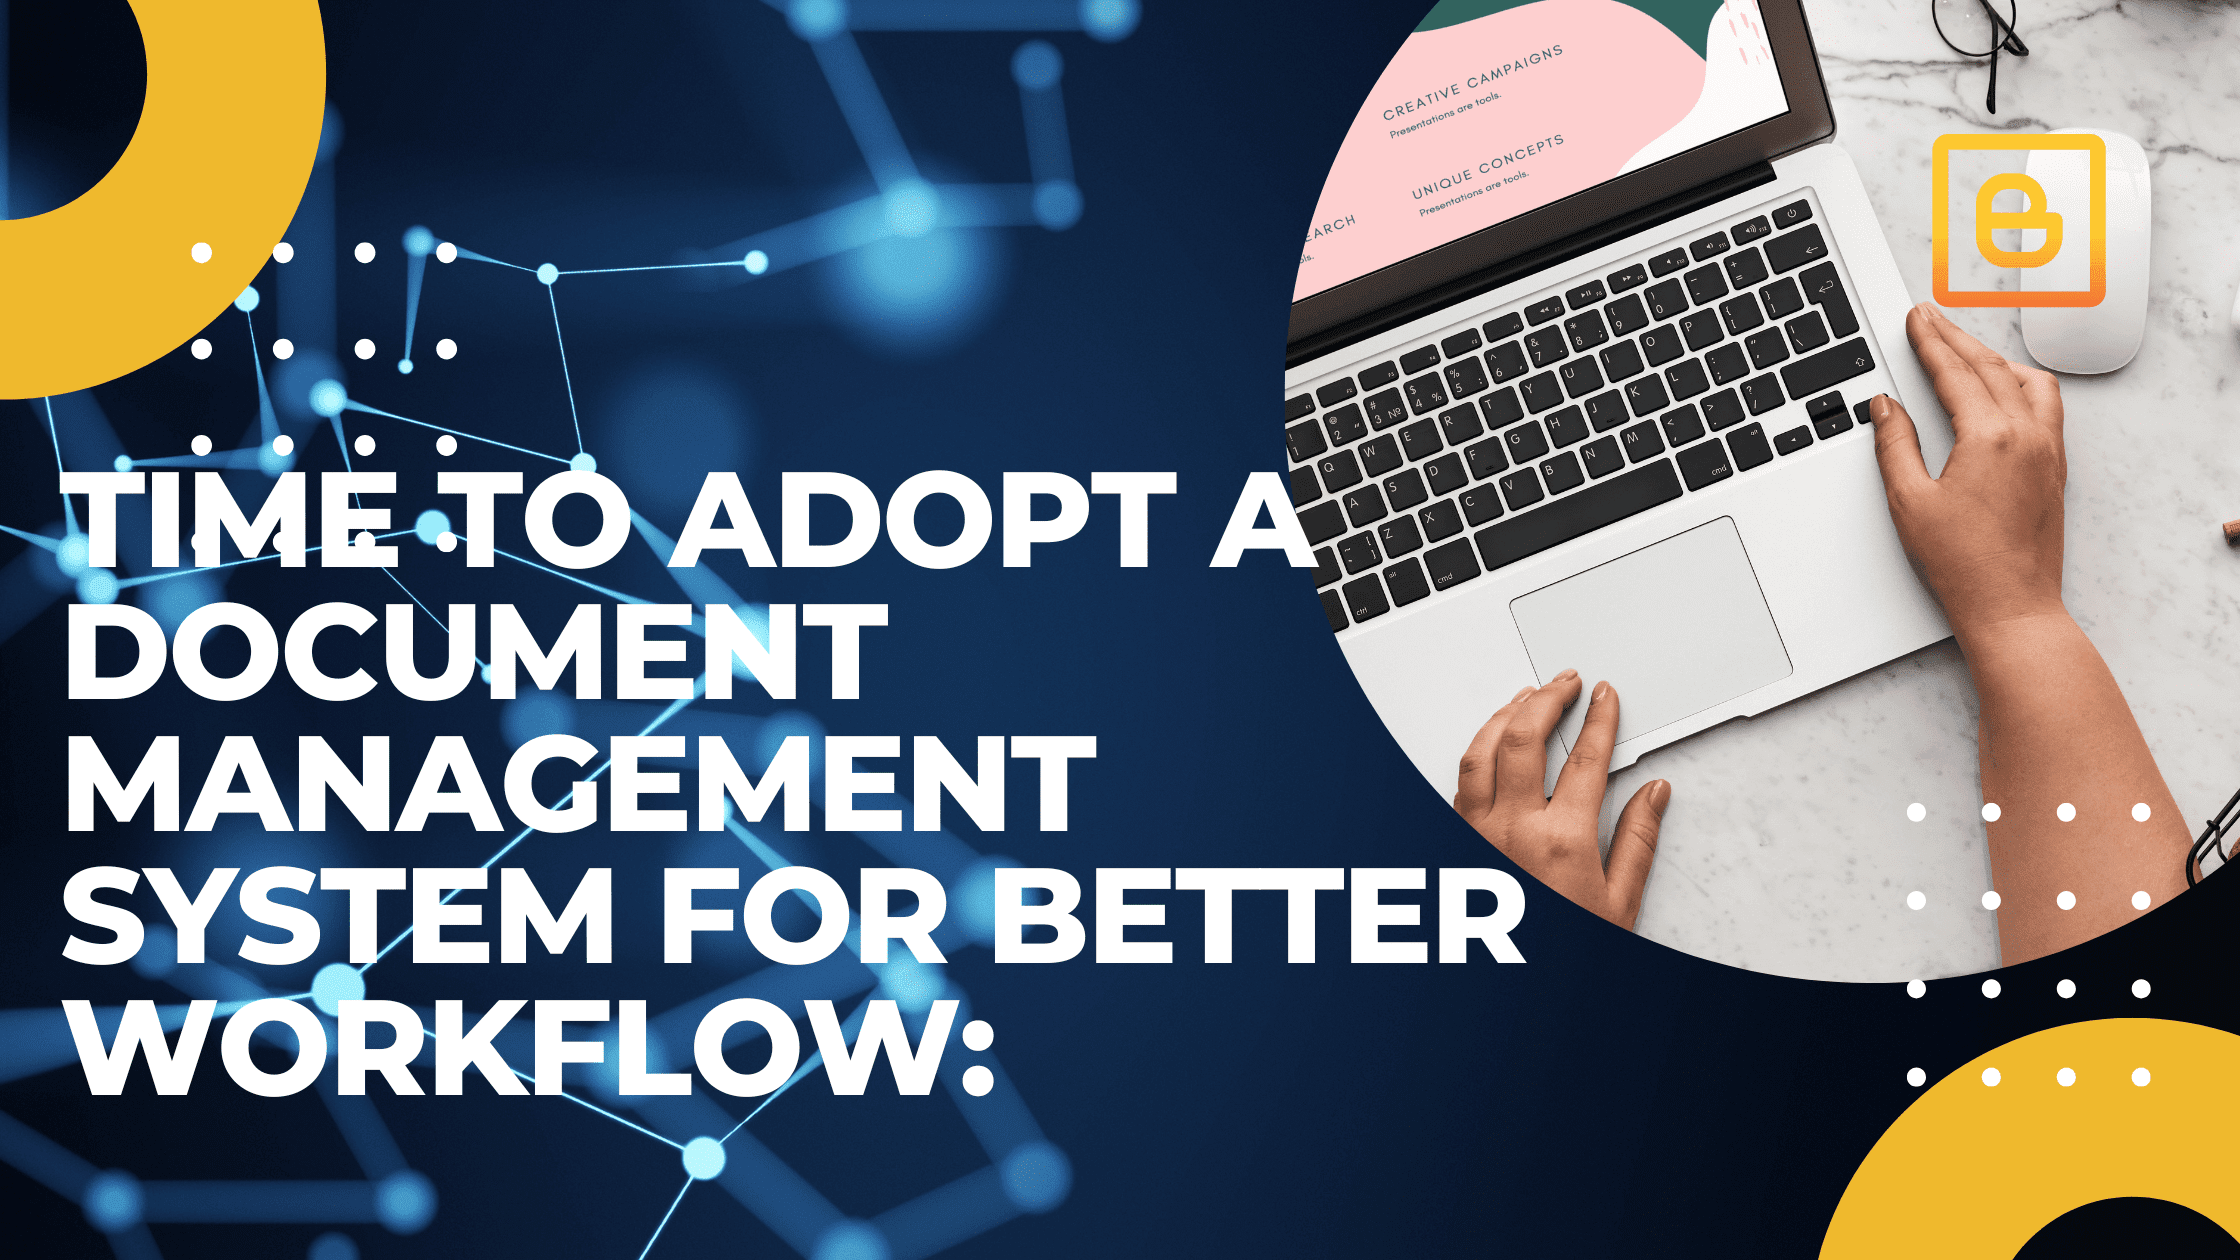 Time to Adopt A Document Management System for Better Workflow: